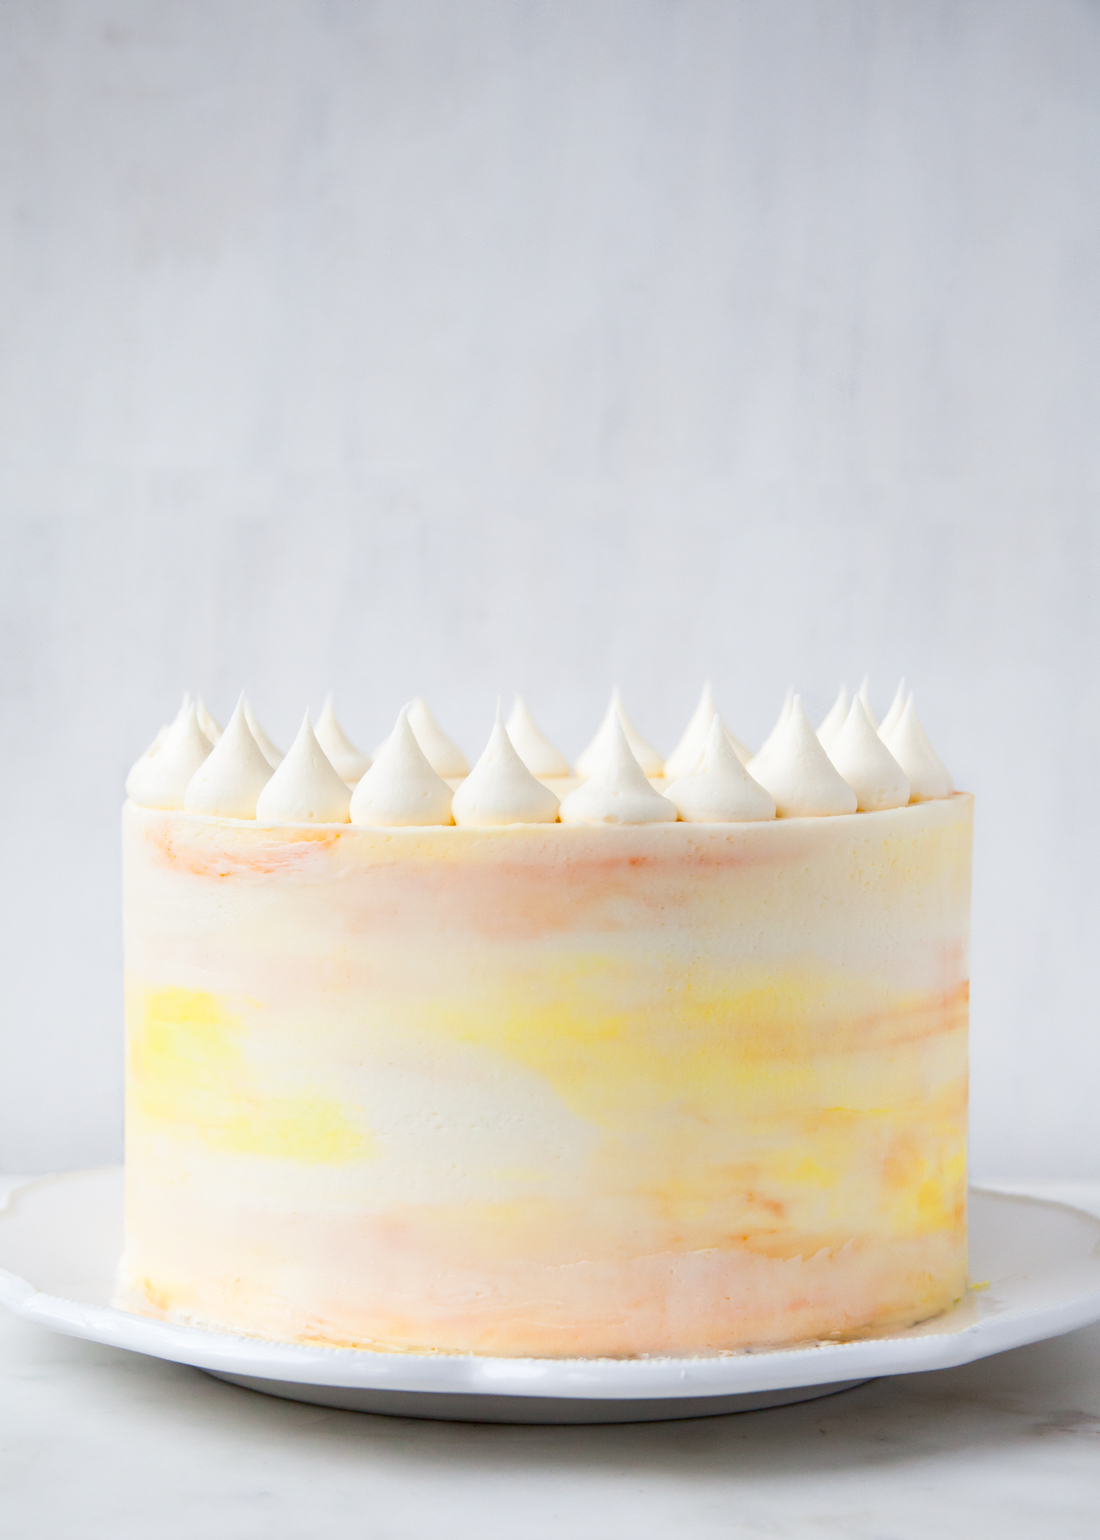 Passion fruit layer cake with coconut and cream cheese frosting.